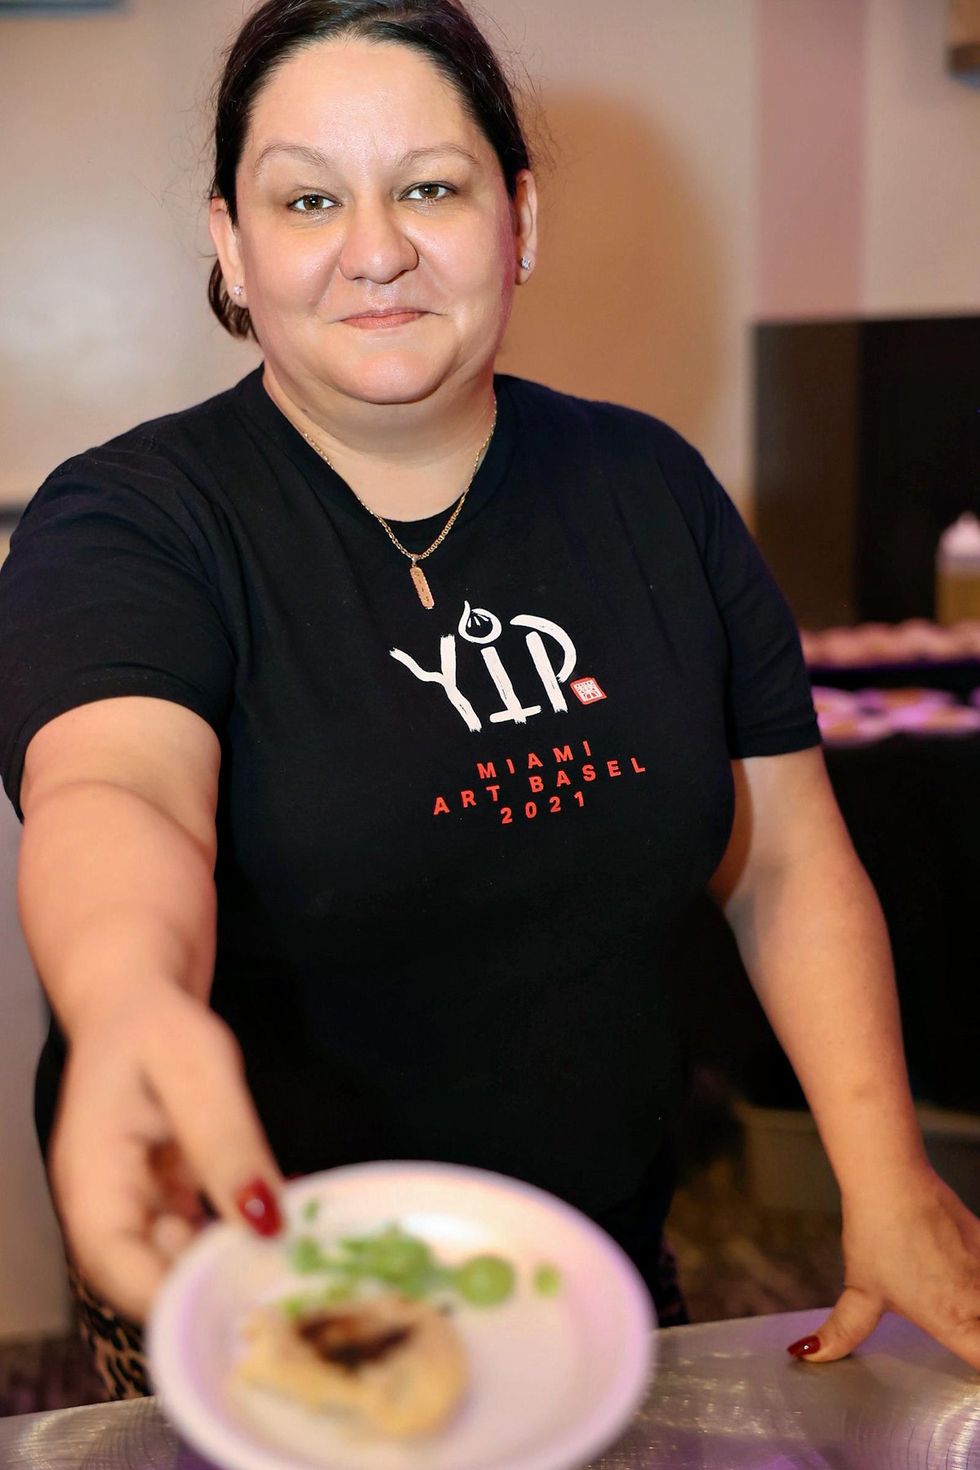 Photo Gallery of Easterseals South Florida's 33rd Annual Festival of Chefs - Jami Batiste from Yip Miami